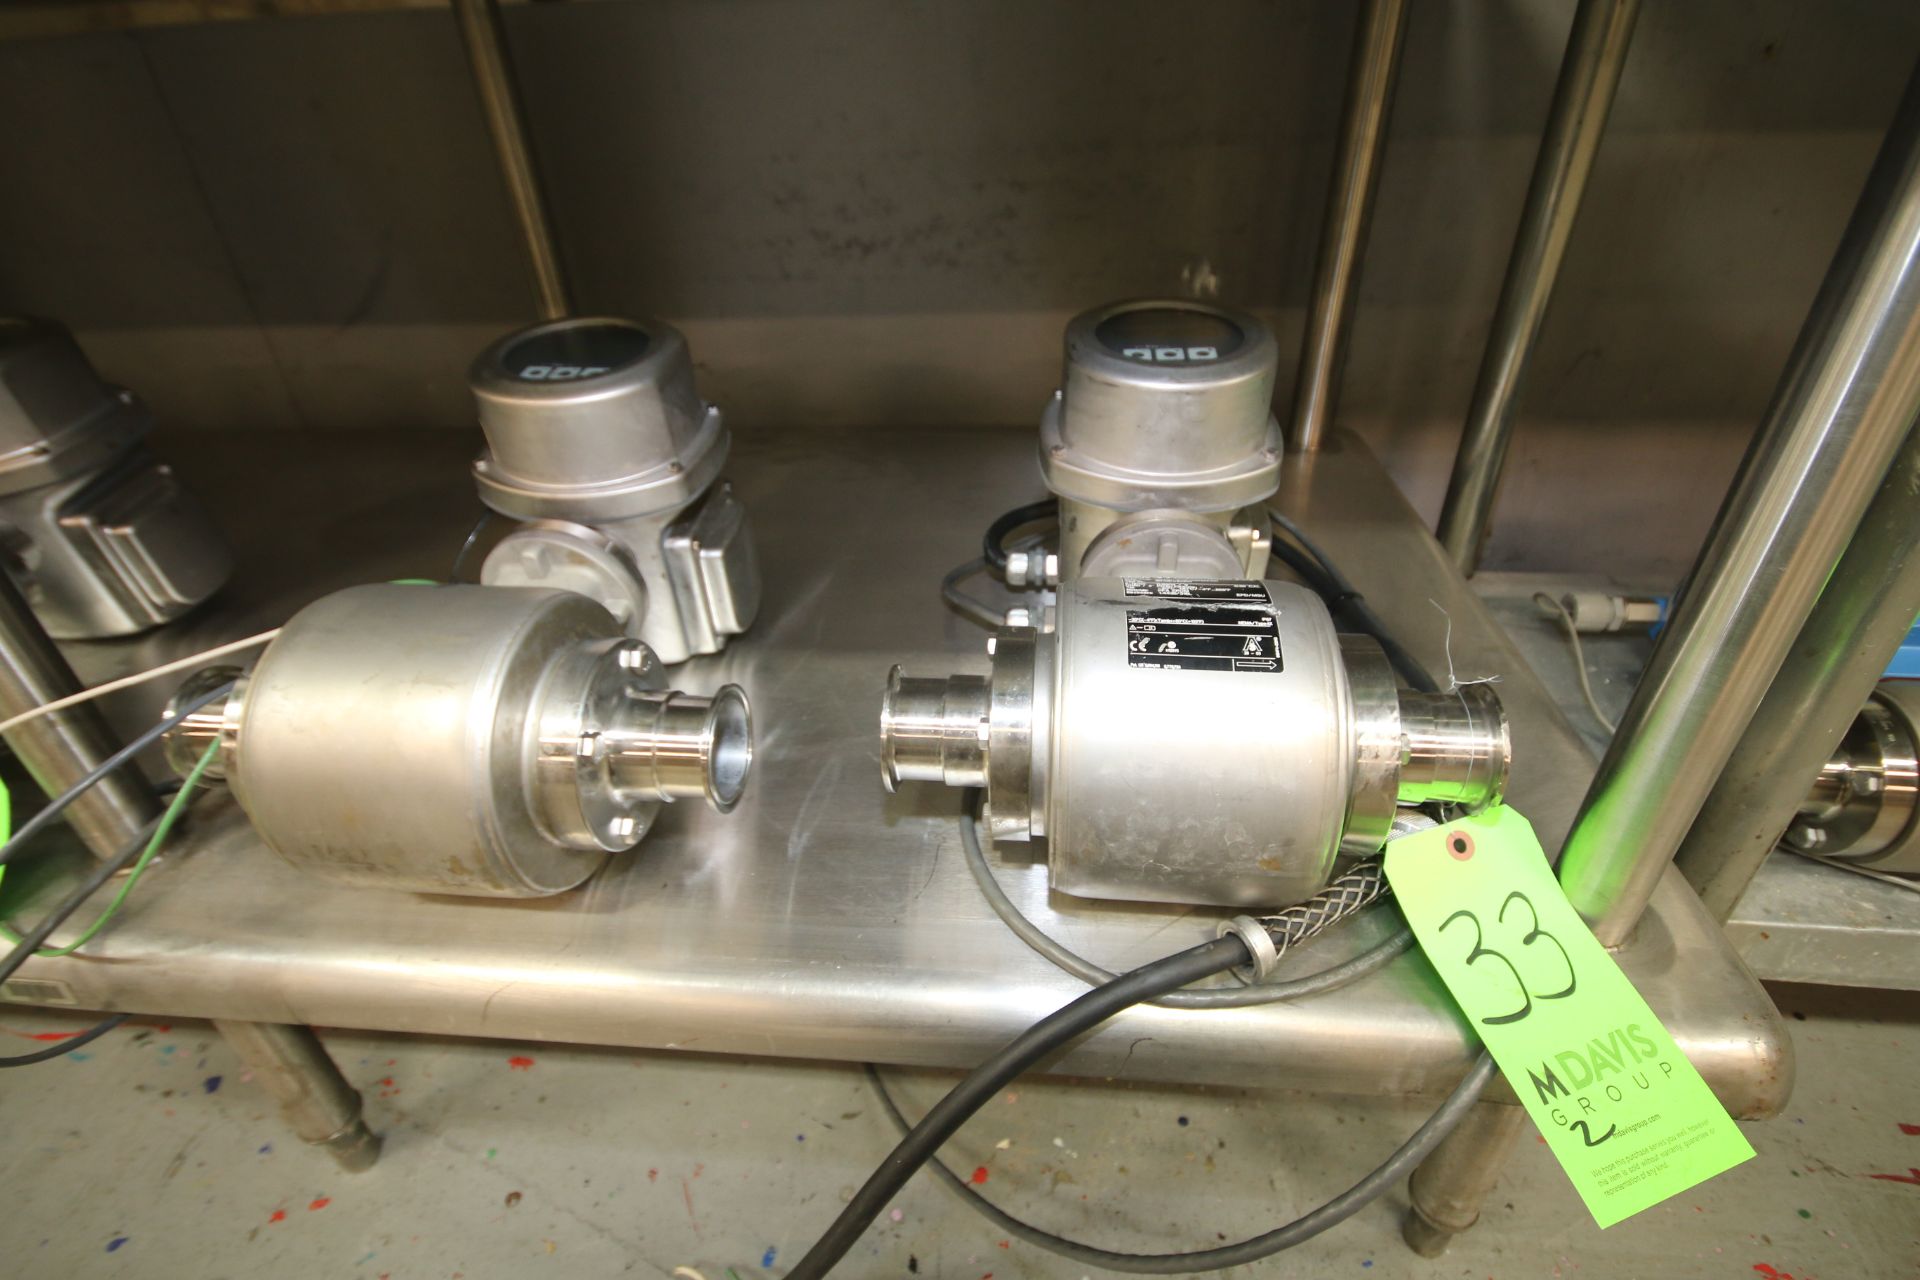 Endress + Hauser 2" Clamp Type Digital Flow Meter with Body, Model ProMag H, S/N 9B02E51600 and